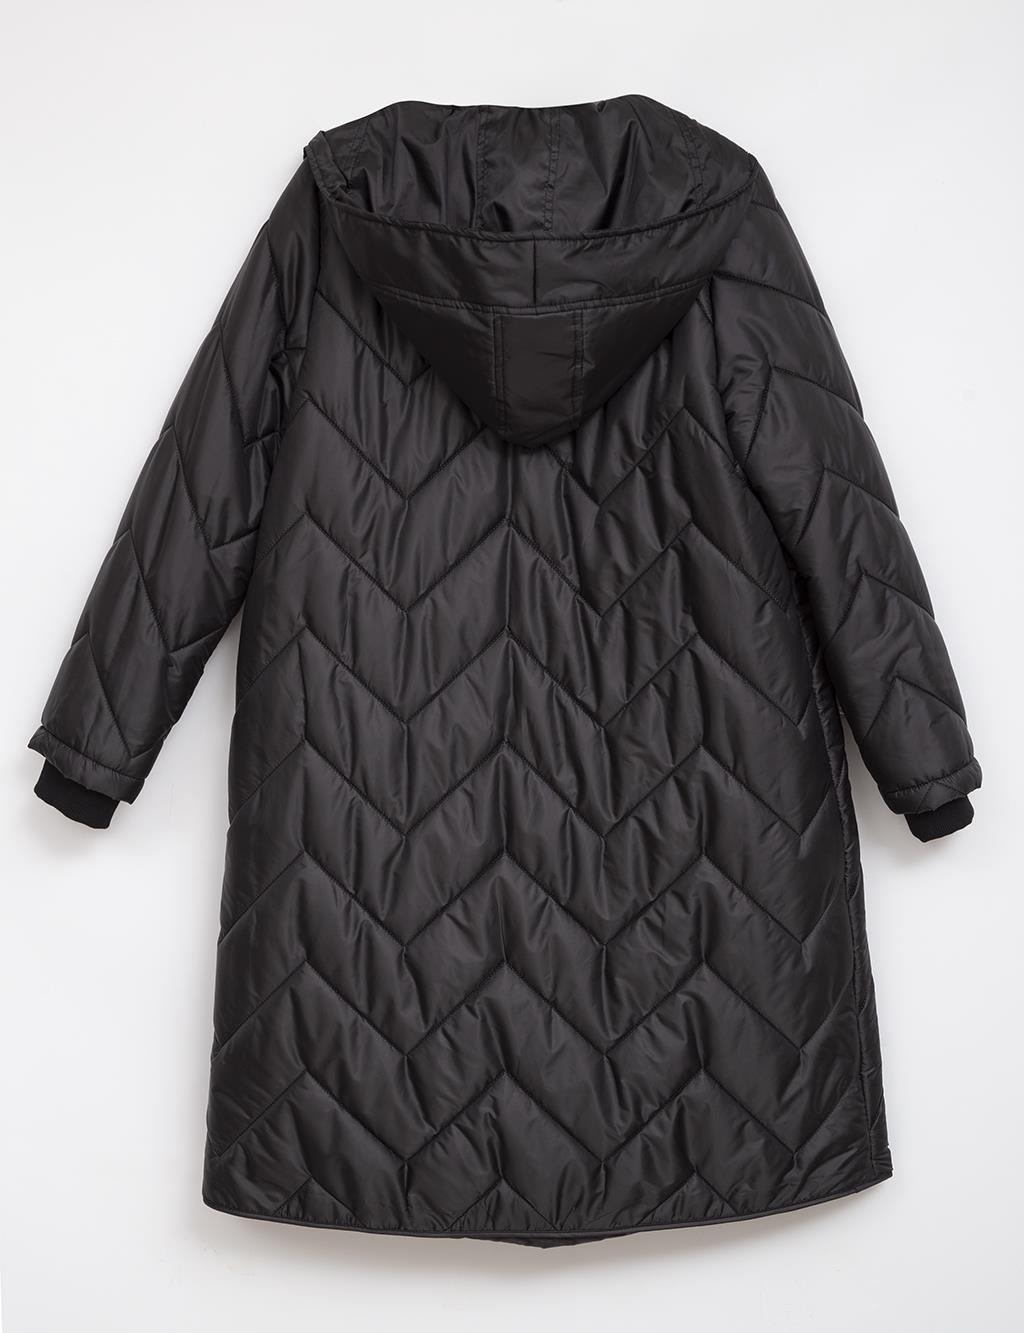 Zigzag Quilted Hooded Short Inflatable Coat Black